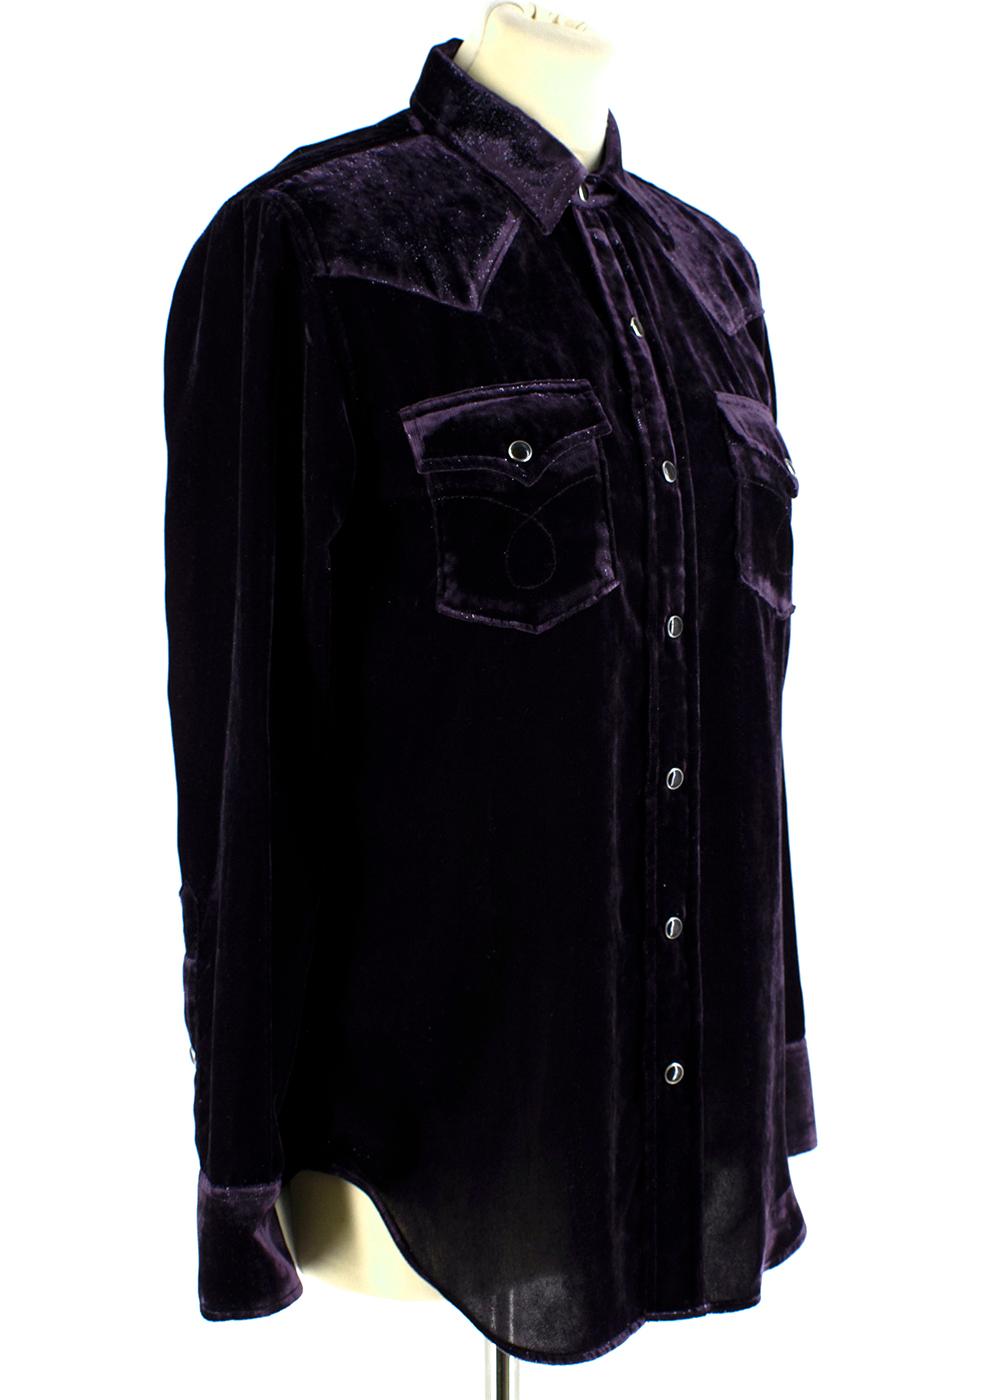 Saint Laurent Purple Metallic Velvet Shirt 

-Western-inspired cut 
-Luxurious soft velvet with lame threads 
-Beautiful deep purple hue 
-2 buttoned flap pockets to the front 
-Pressure button fastening with a lacquered finish 
-Buttoned cuffs